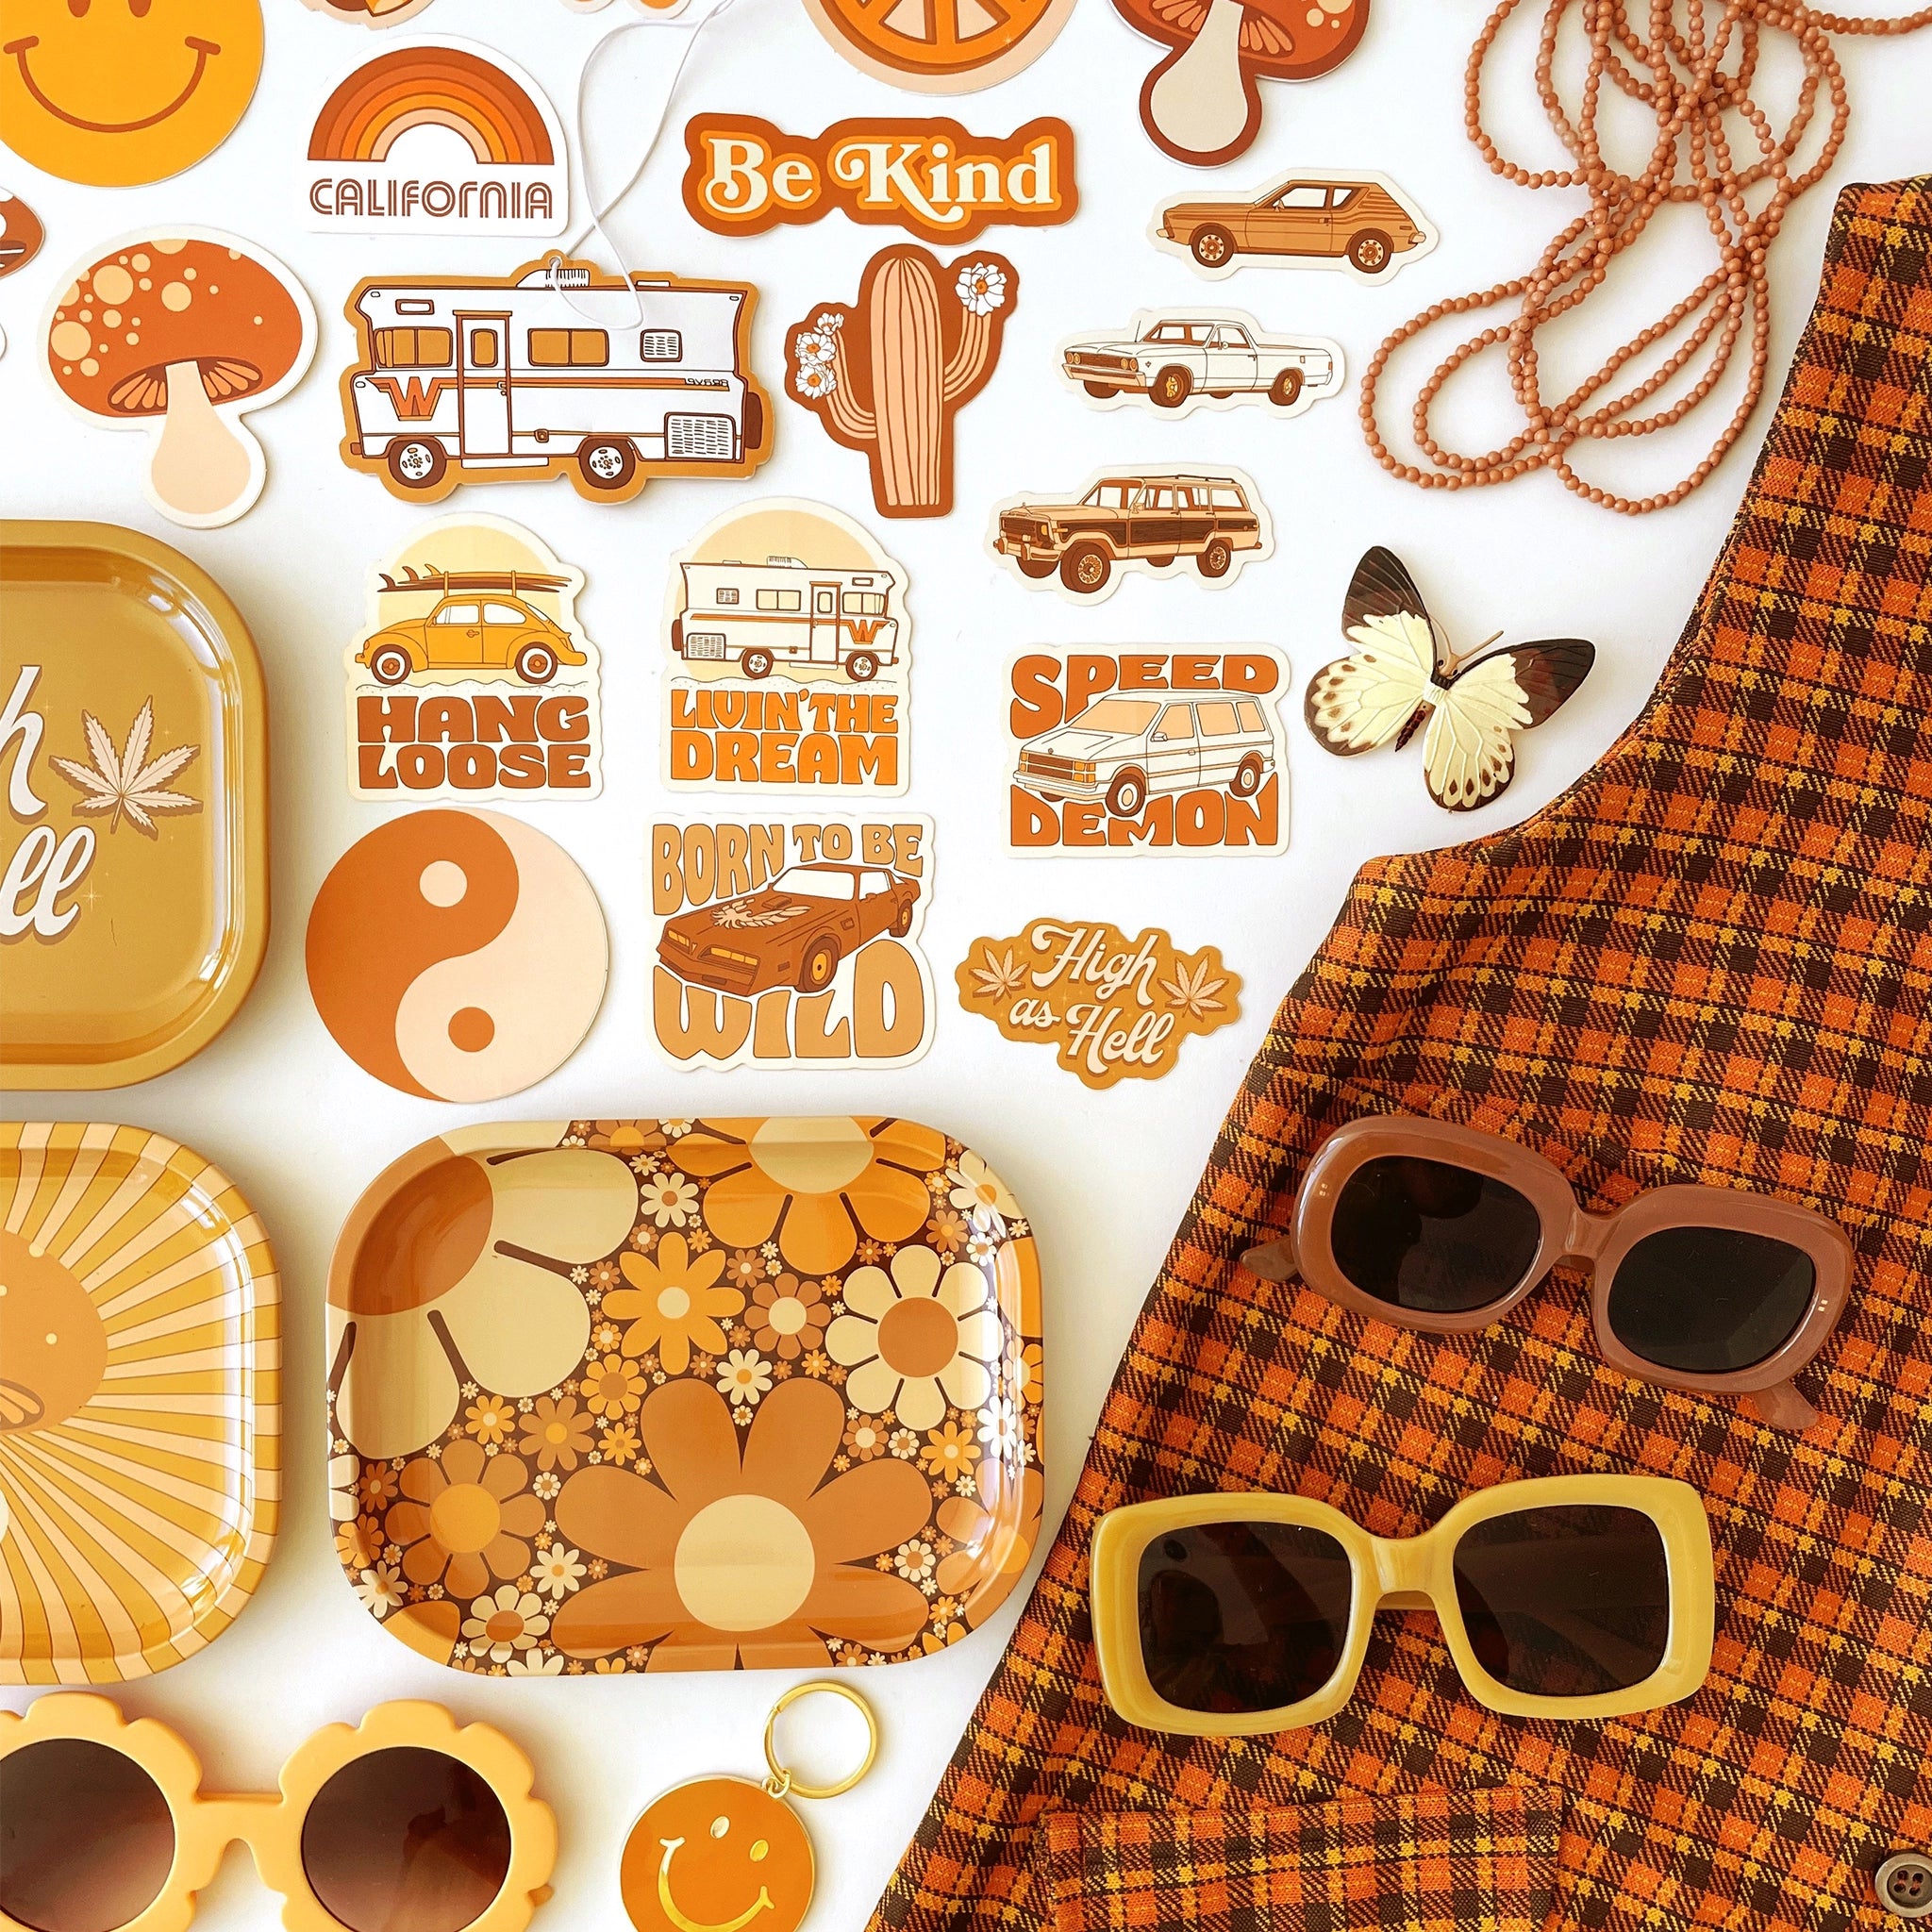 On a white background is a collage of different stickers, sunglasses, keychains, and trays all in different shades of burnt oranges and mustard yellow. The designs range from different vintage cards, 70's inspired daisies, mushrooms, rainbows and smiley faces. 